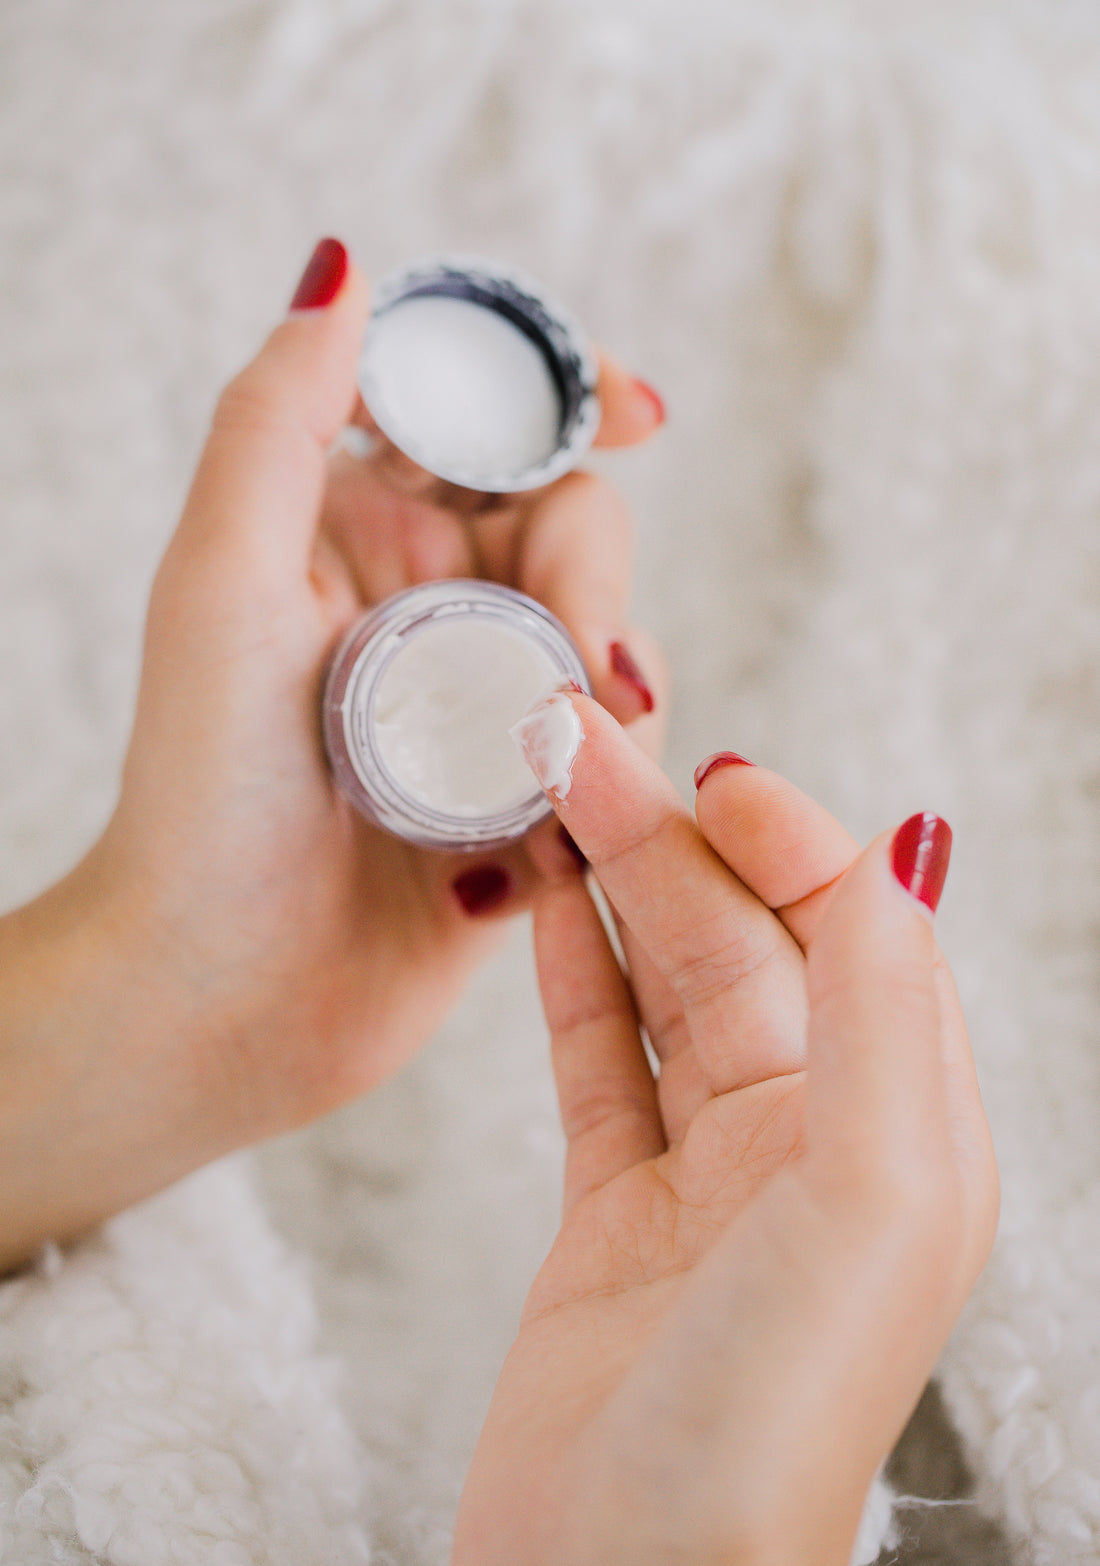 Body Butter vs. Body Lotion: What's the Big Deal?